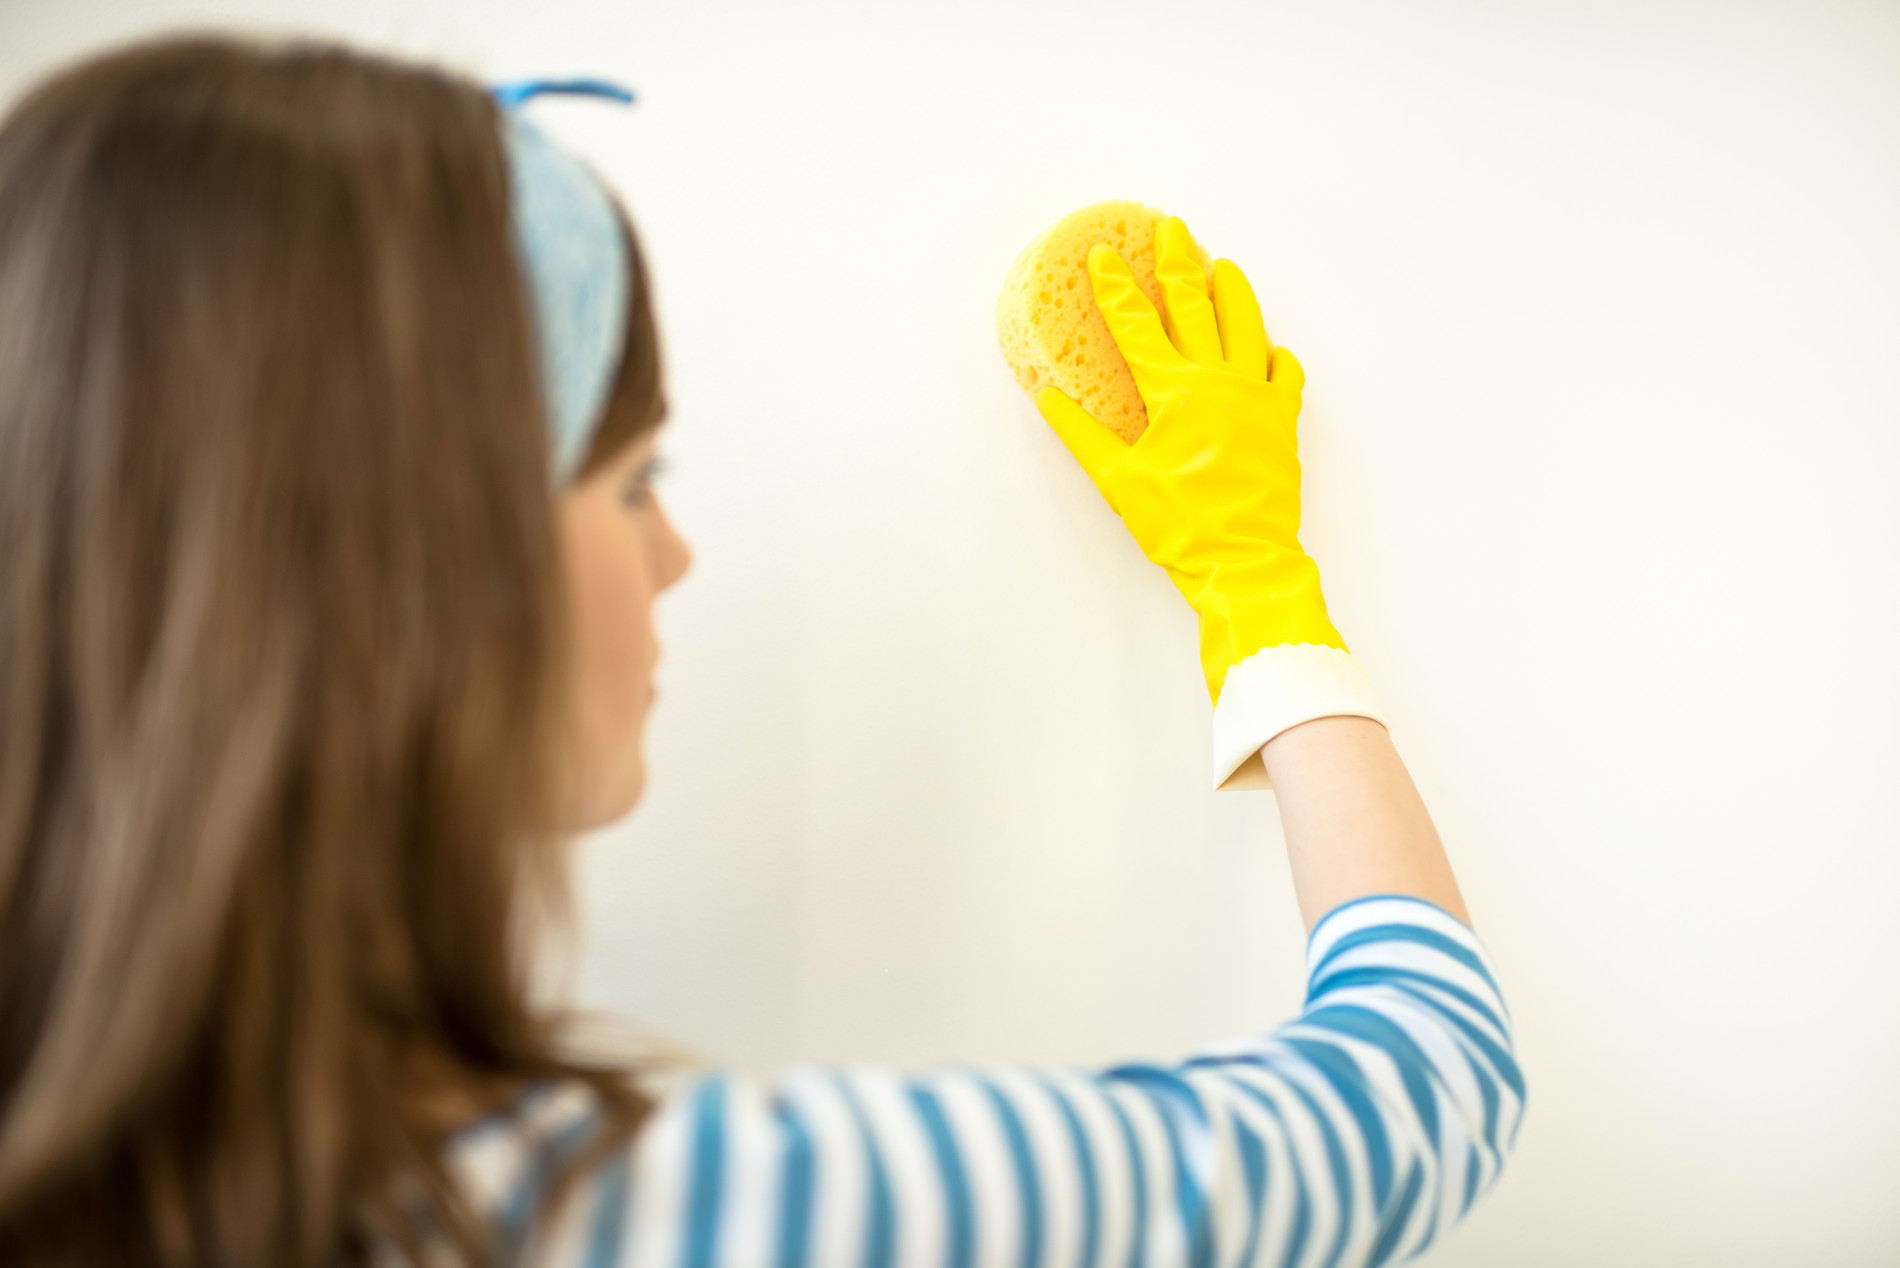 Grease Stains on Walls - 3 Proven Ways to Clean Grease off Walls